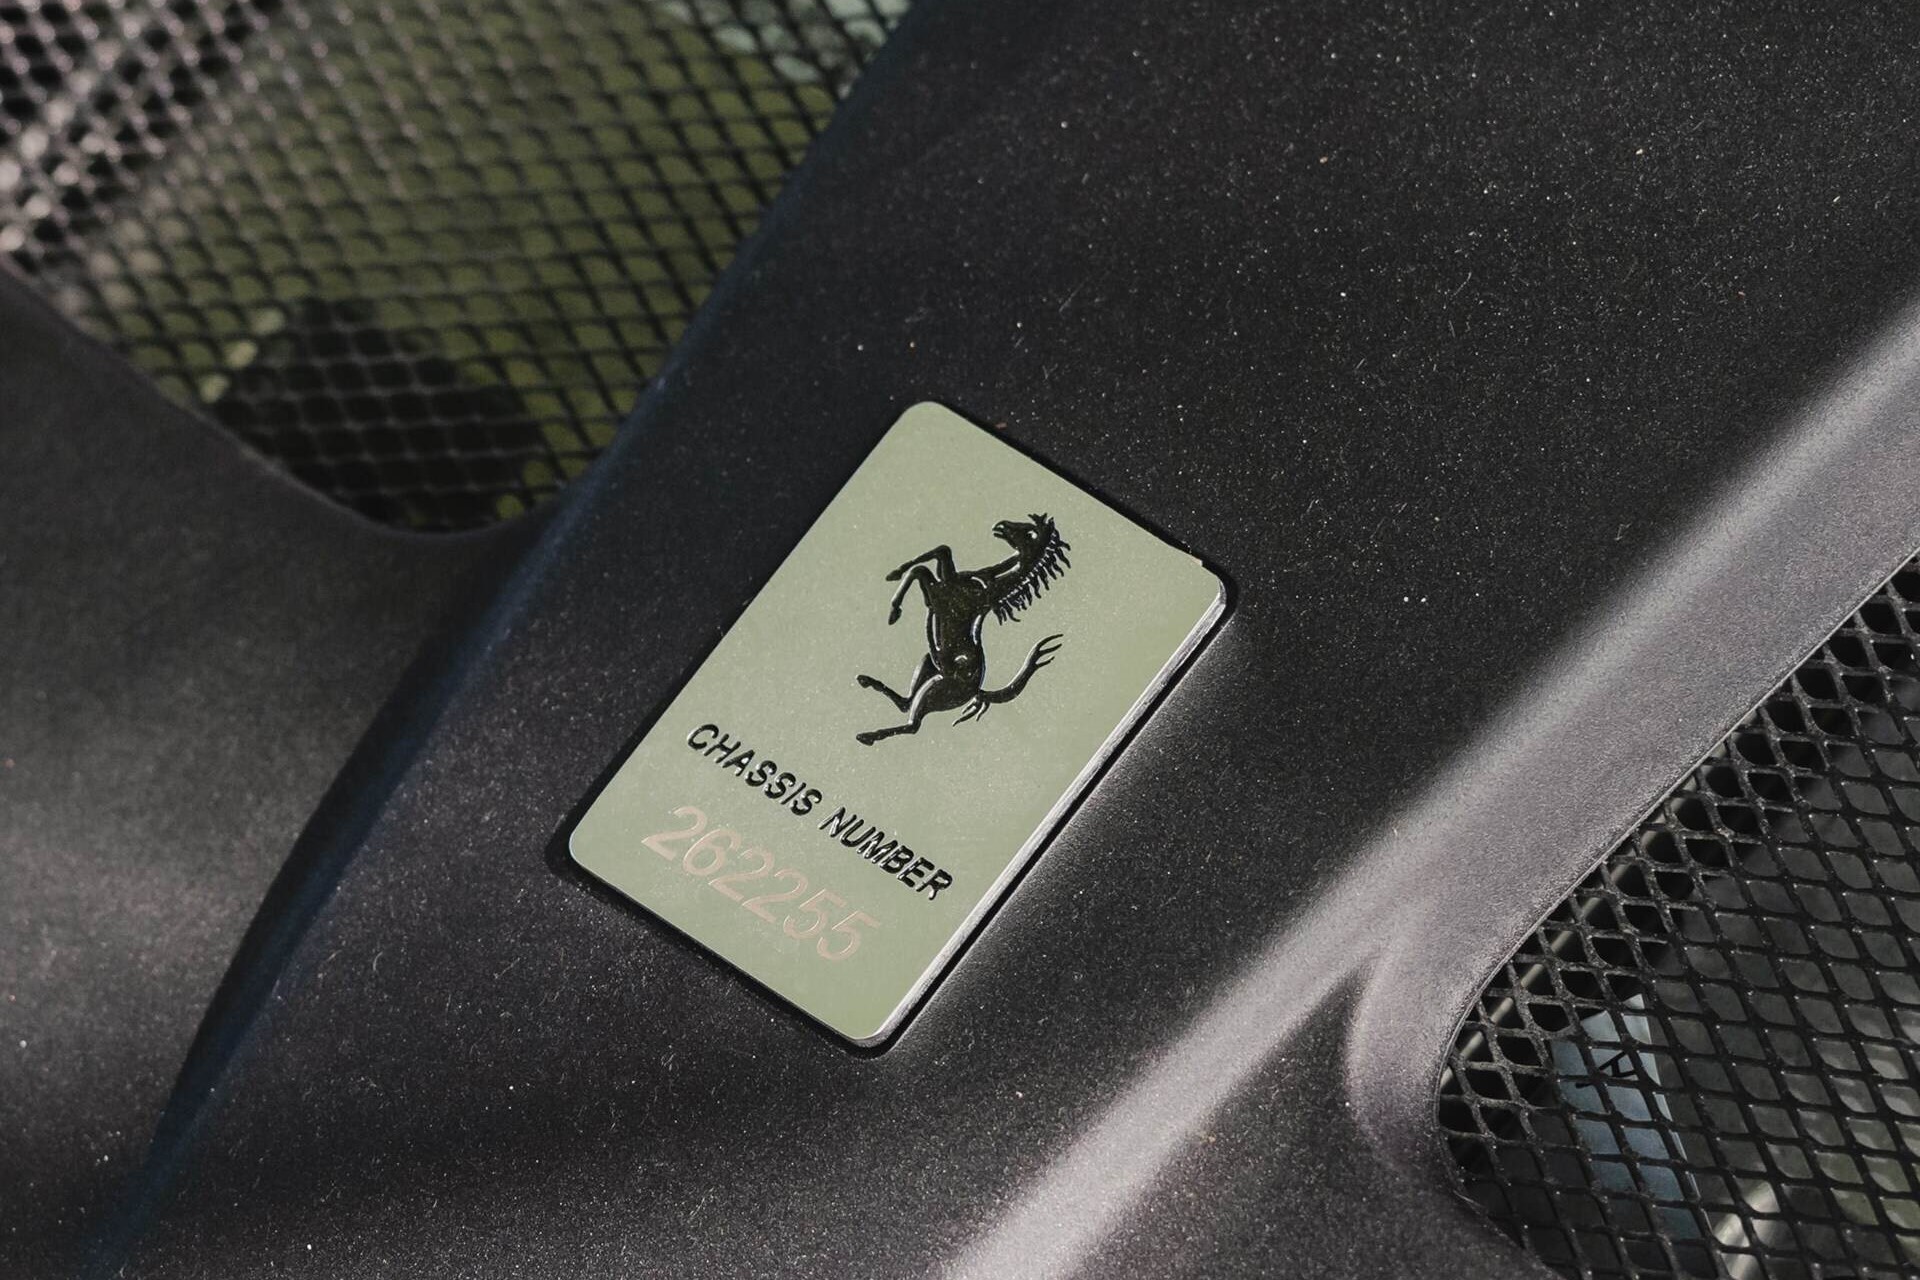 plaque showing the chassis number of a blue 2020 Ferrari 812 GTS